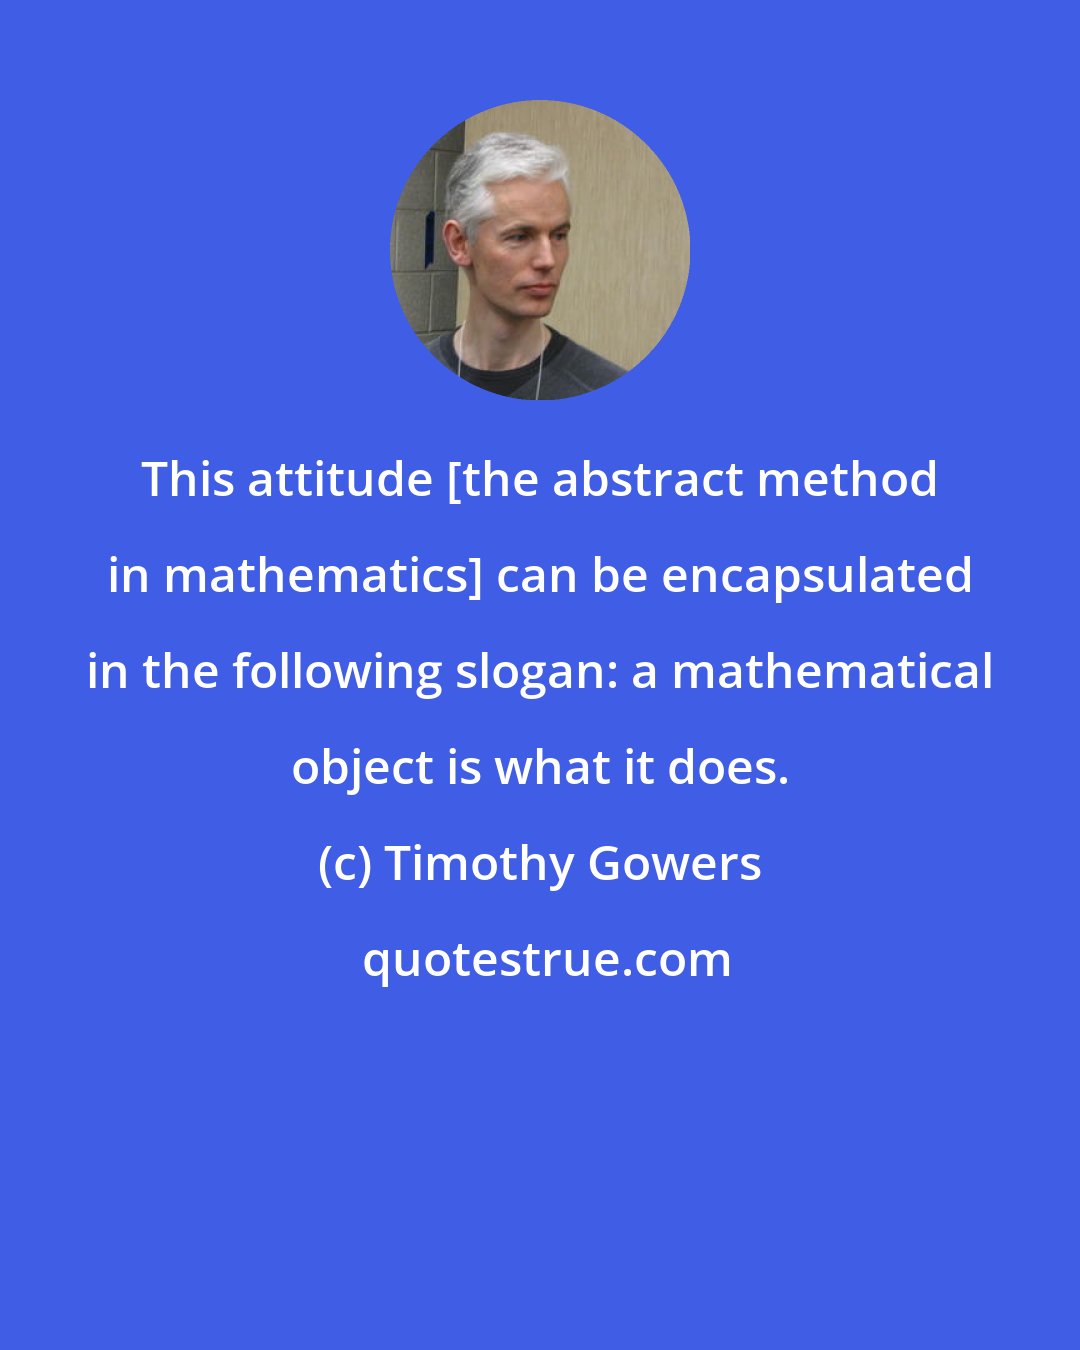 Timothy Gowers: This attitude [the abstract method in mathematics] can be encapsulated in the following slogan: a mathematical object is what it does.